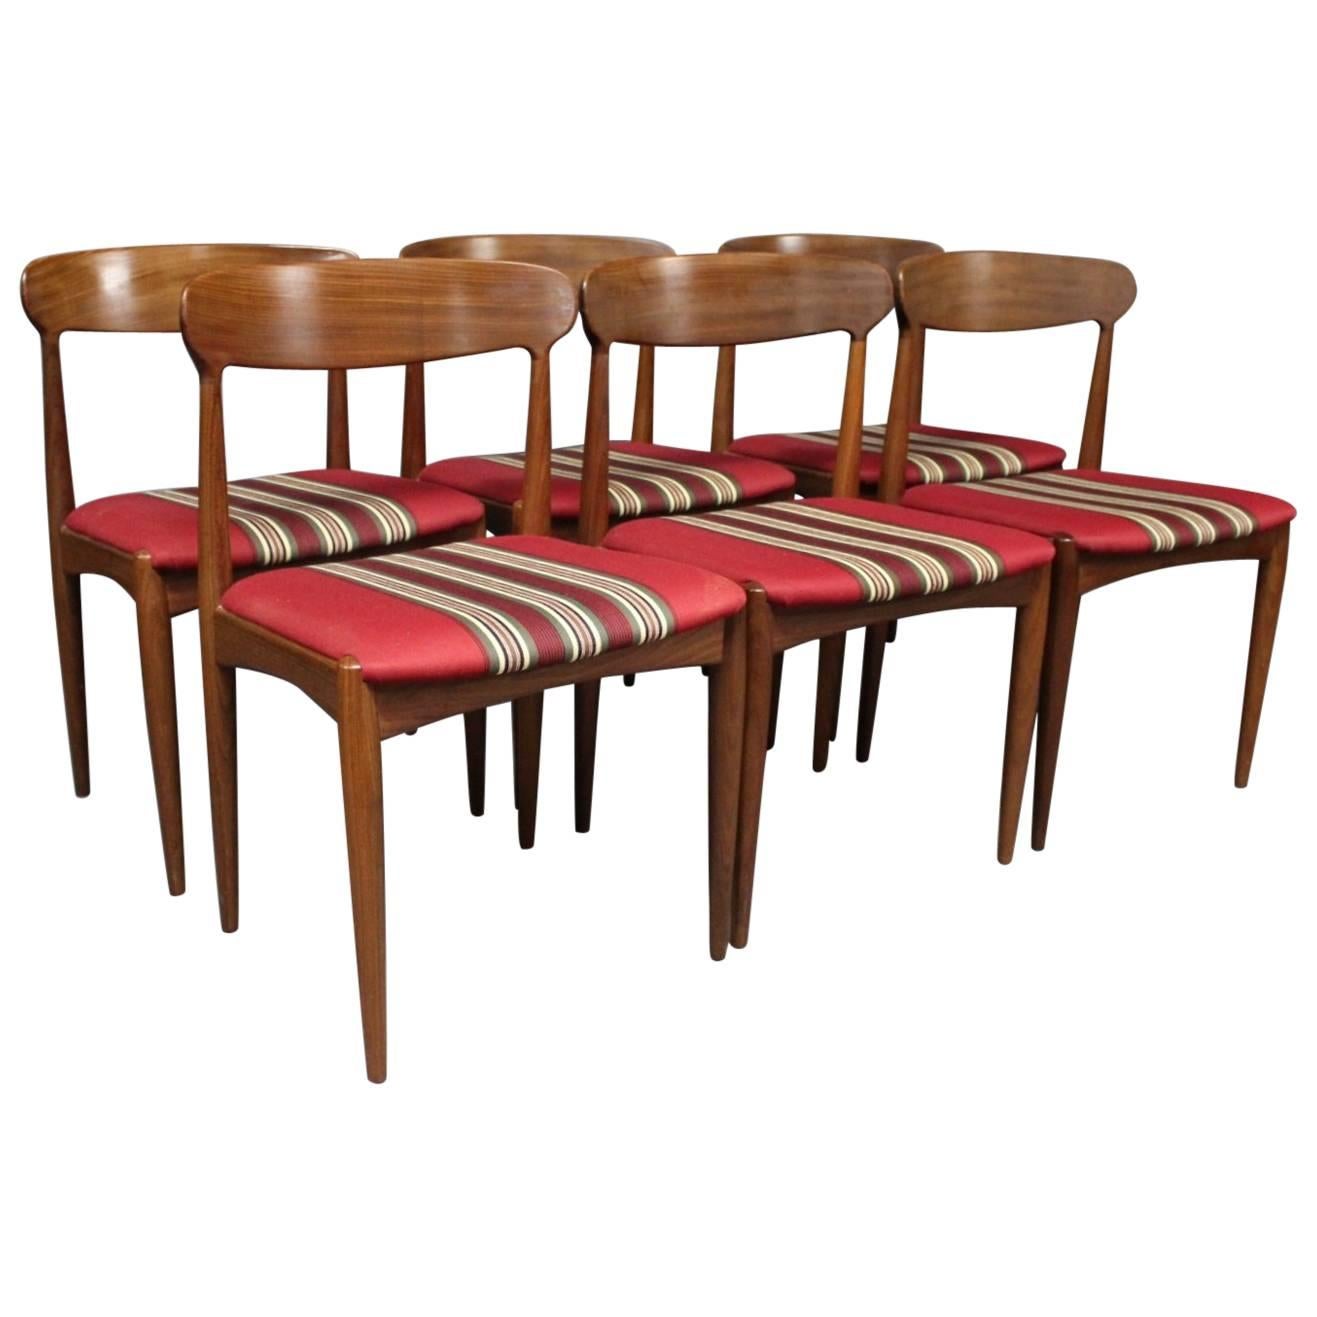 Set of Six Dining Room Chairs by Johannes Andersen and Uldum Furniture, 1960s